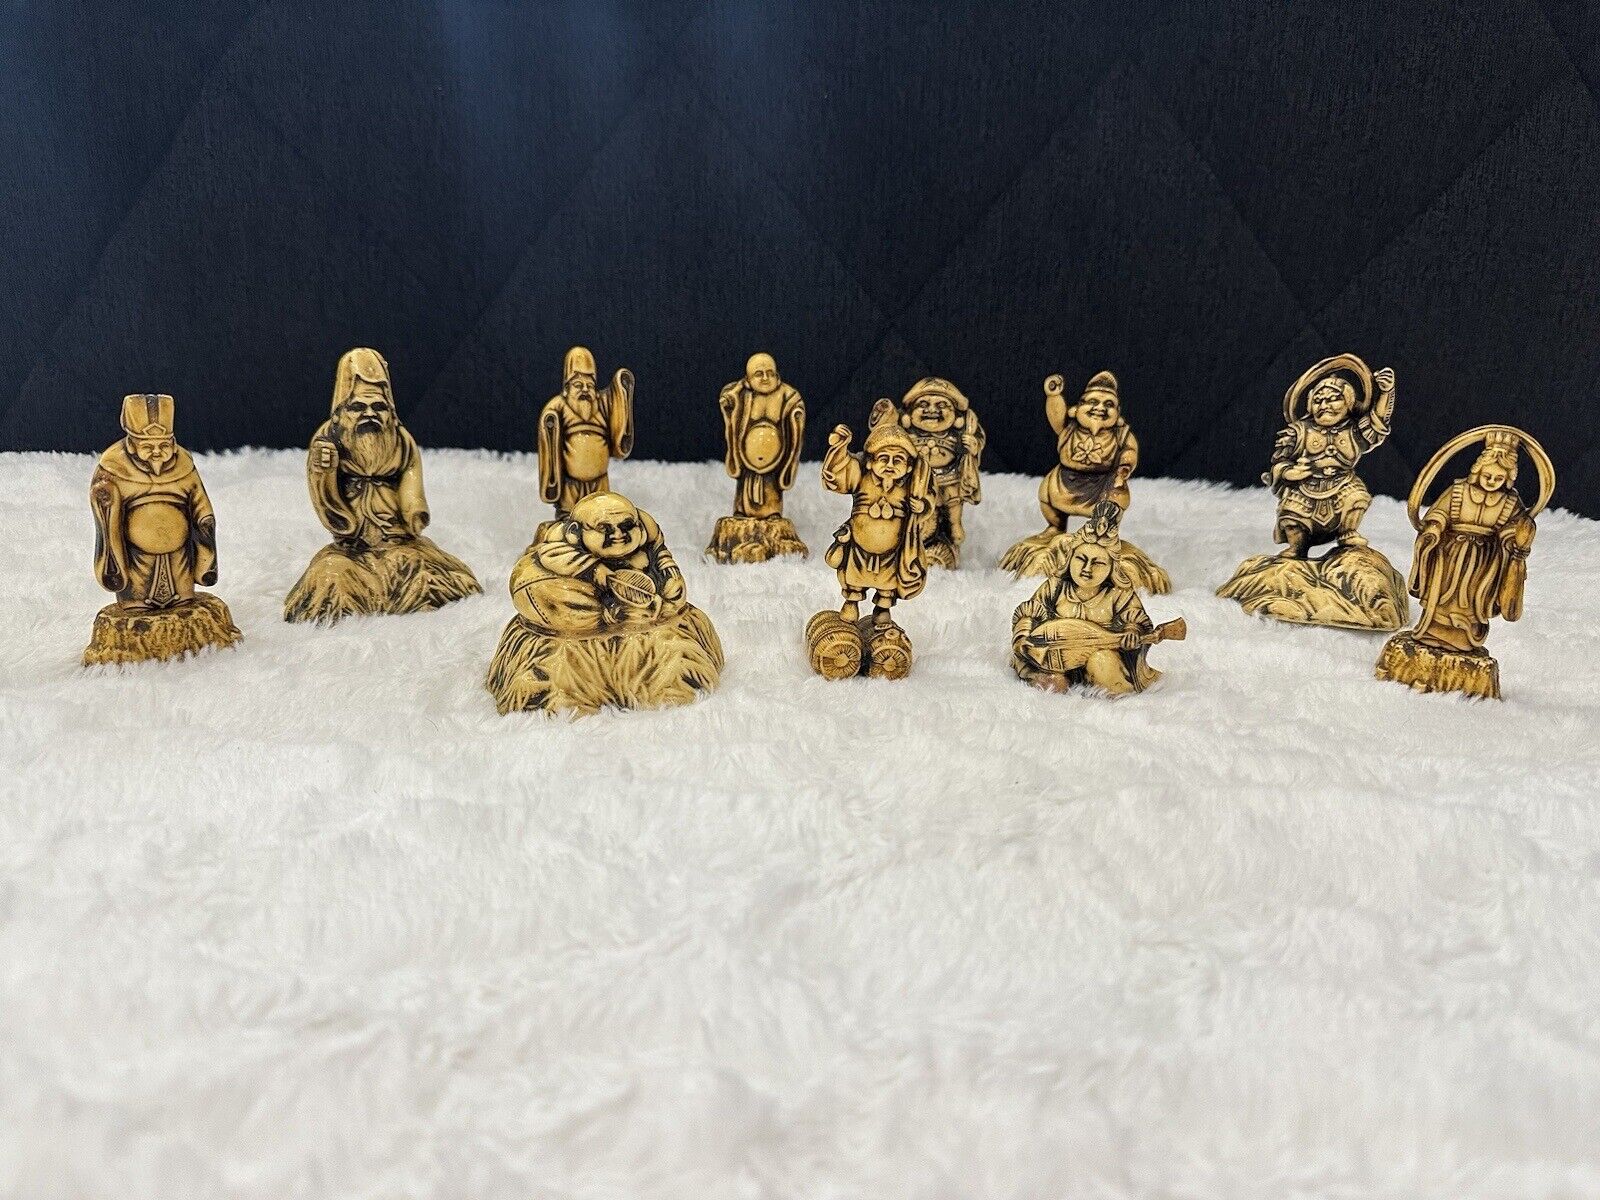 Japanese Seven Lucky Gods Figurines Celluloid or Plastic 1900 1930 Vintage 11